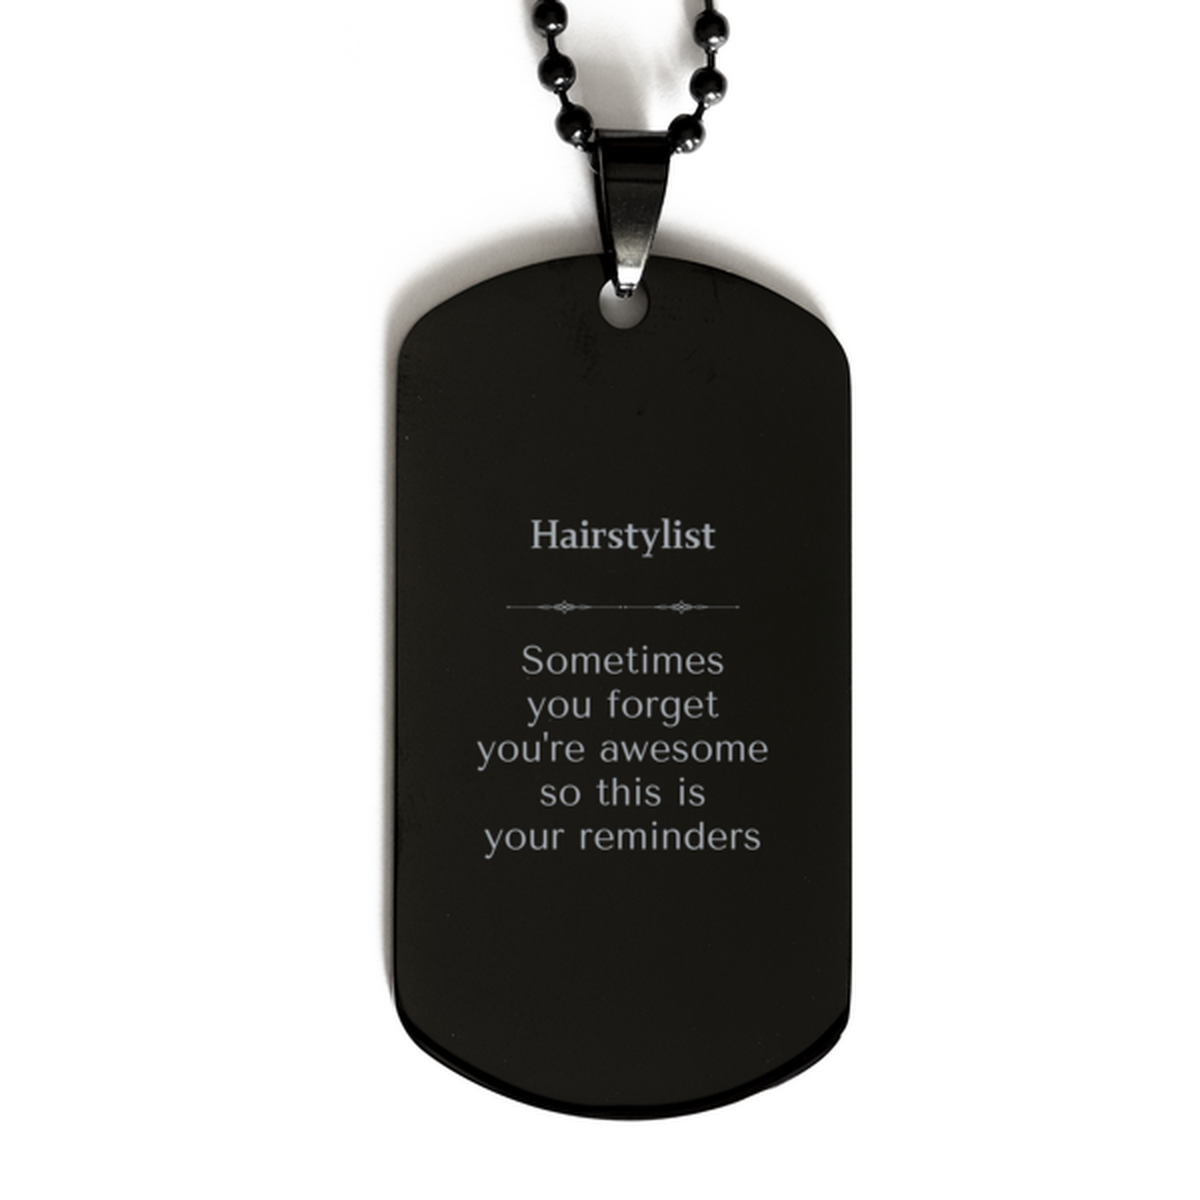 Sentimental Hairstylist Black Dog Tag, Hairstylist Sometimes you forget you're awesome so this is your reminders, Graduation Christmas Birthday Gifts for Hairstylist, Men, Women, Coworkers